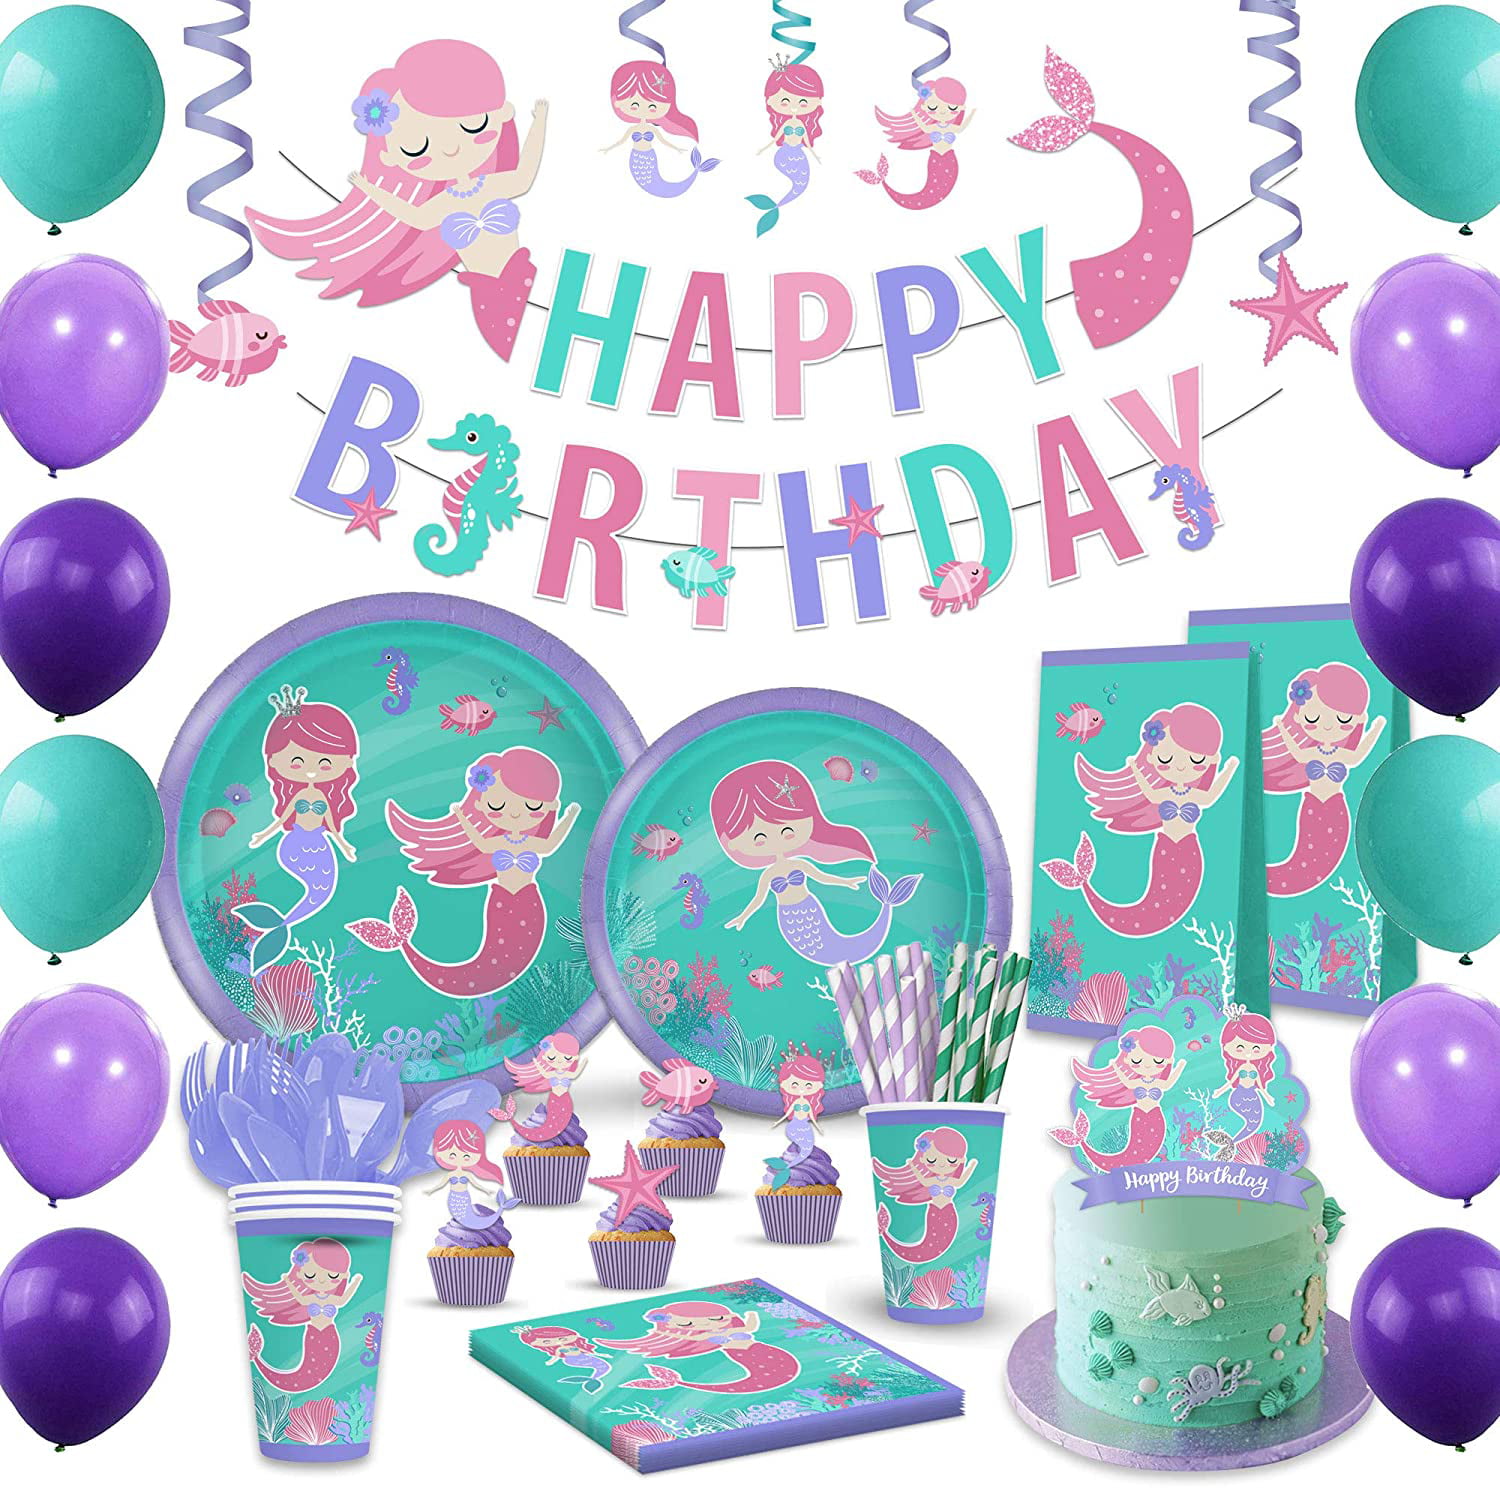 Cups Tablecover Favor Bags Foil Balloon HAPPY BIRTHDAY Banner Cutlery Mermaid Party Set 8 Guest Ultimate under the Sea Birthday Candles HeroFiber Napkins Small and Large Plates Mini Bendable Dolls 